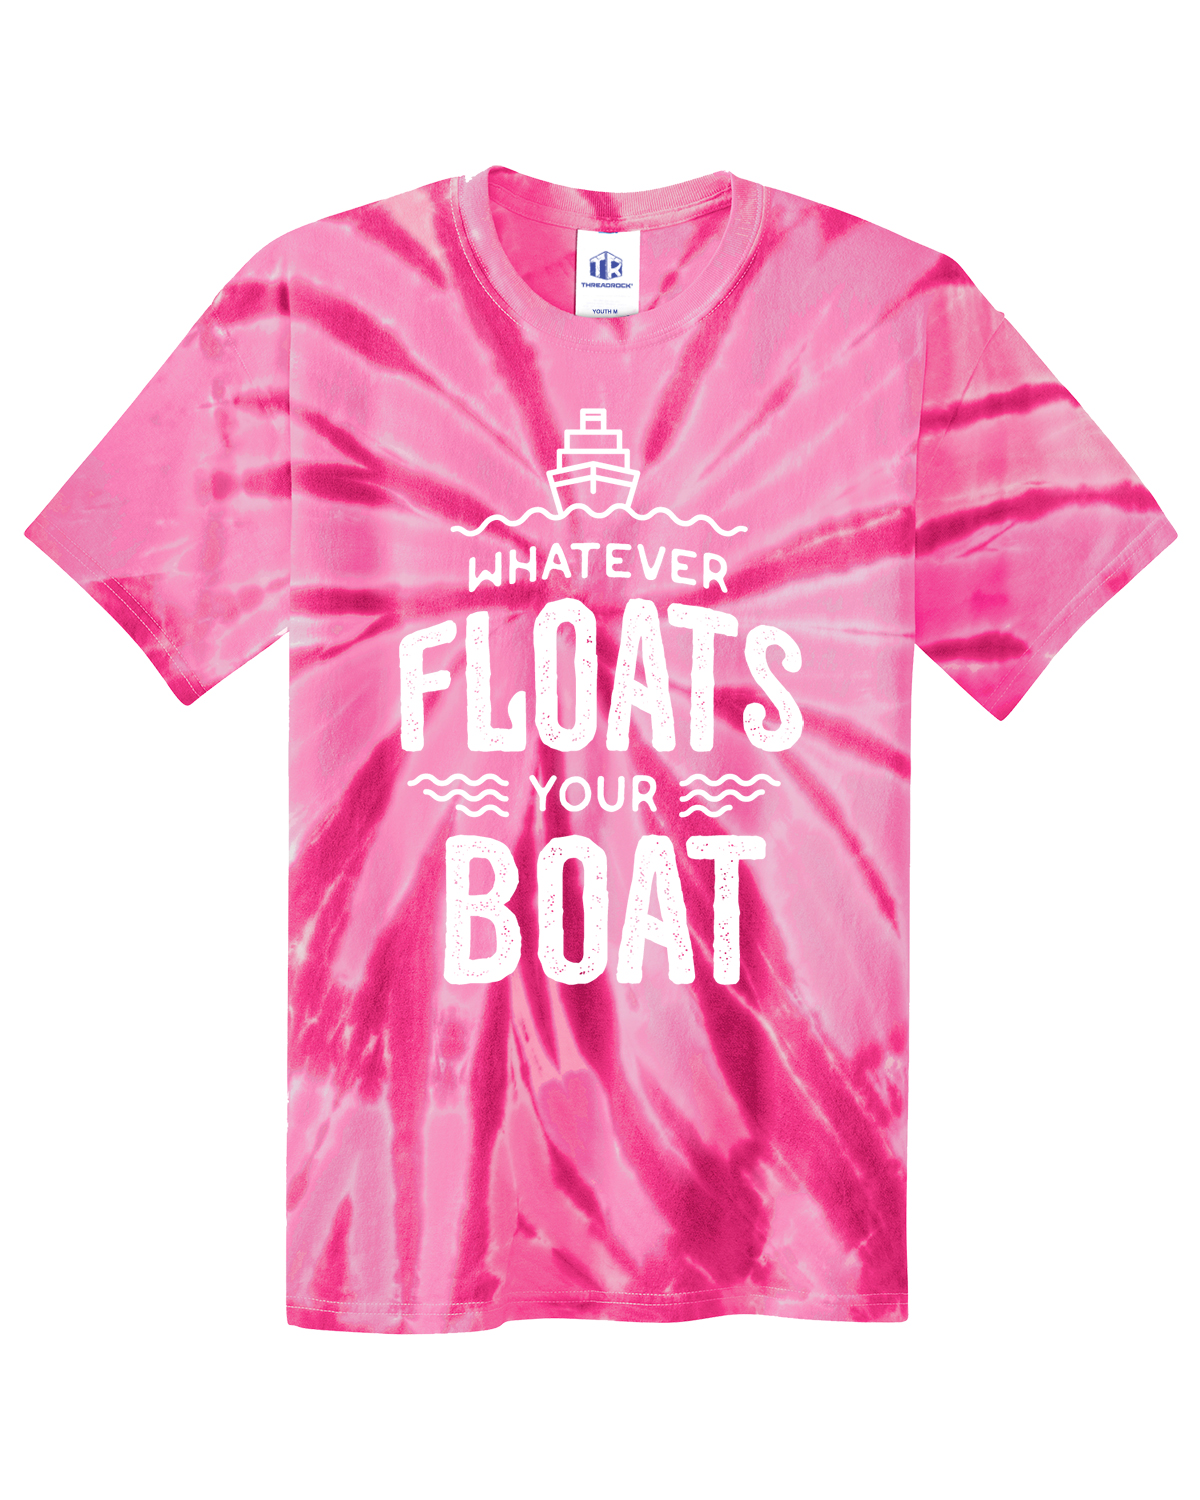 Whatever Floats Your Boat Youth Tie Dye T-Shirt Cruise Fishing Saying